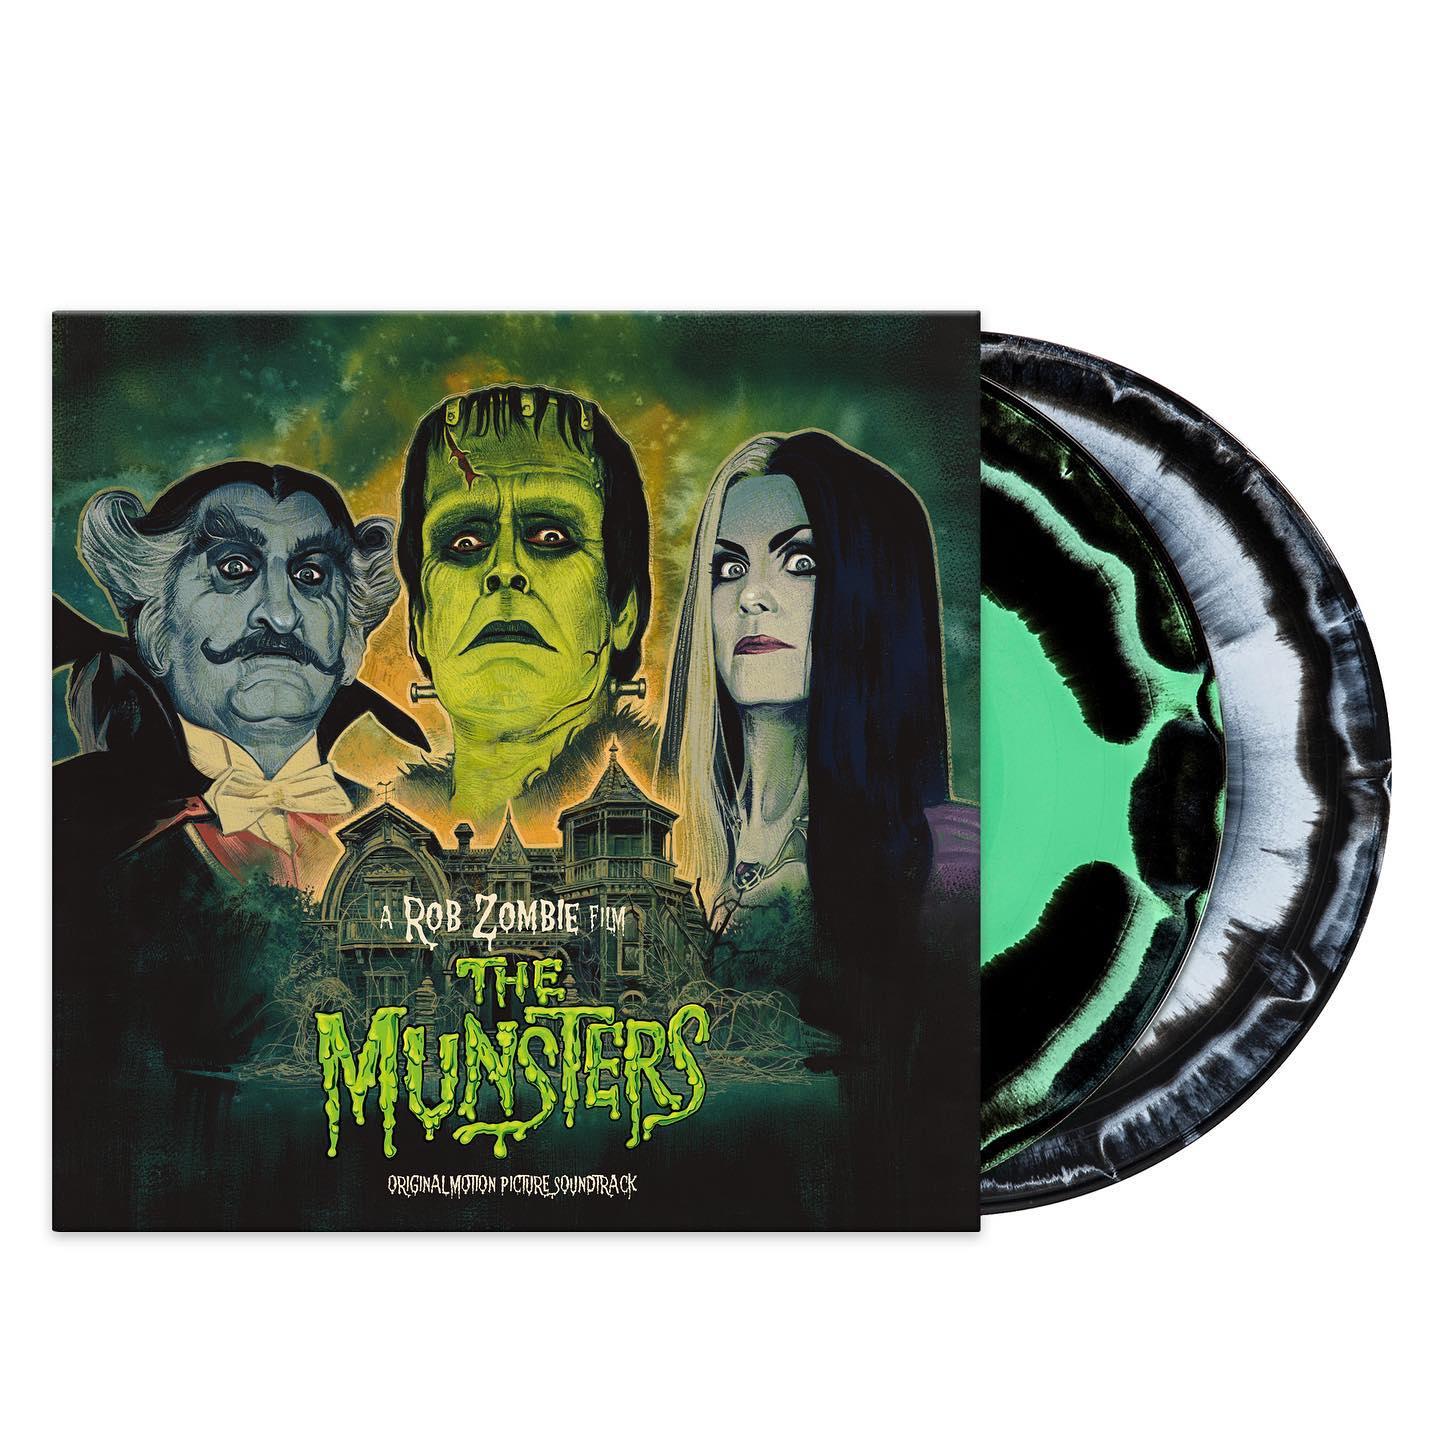 Rob Zombie's - The Munsters Soundtrack.